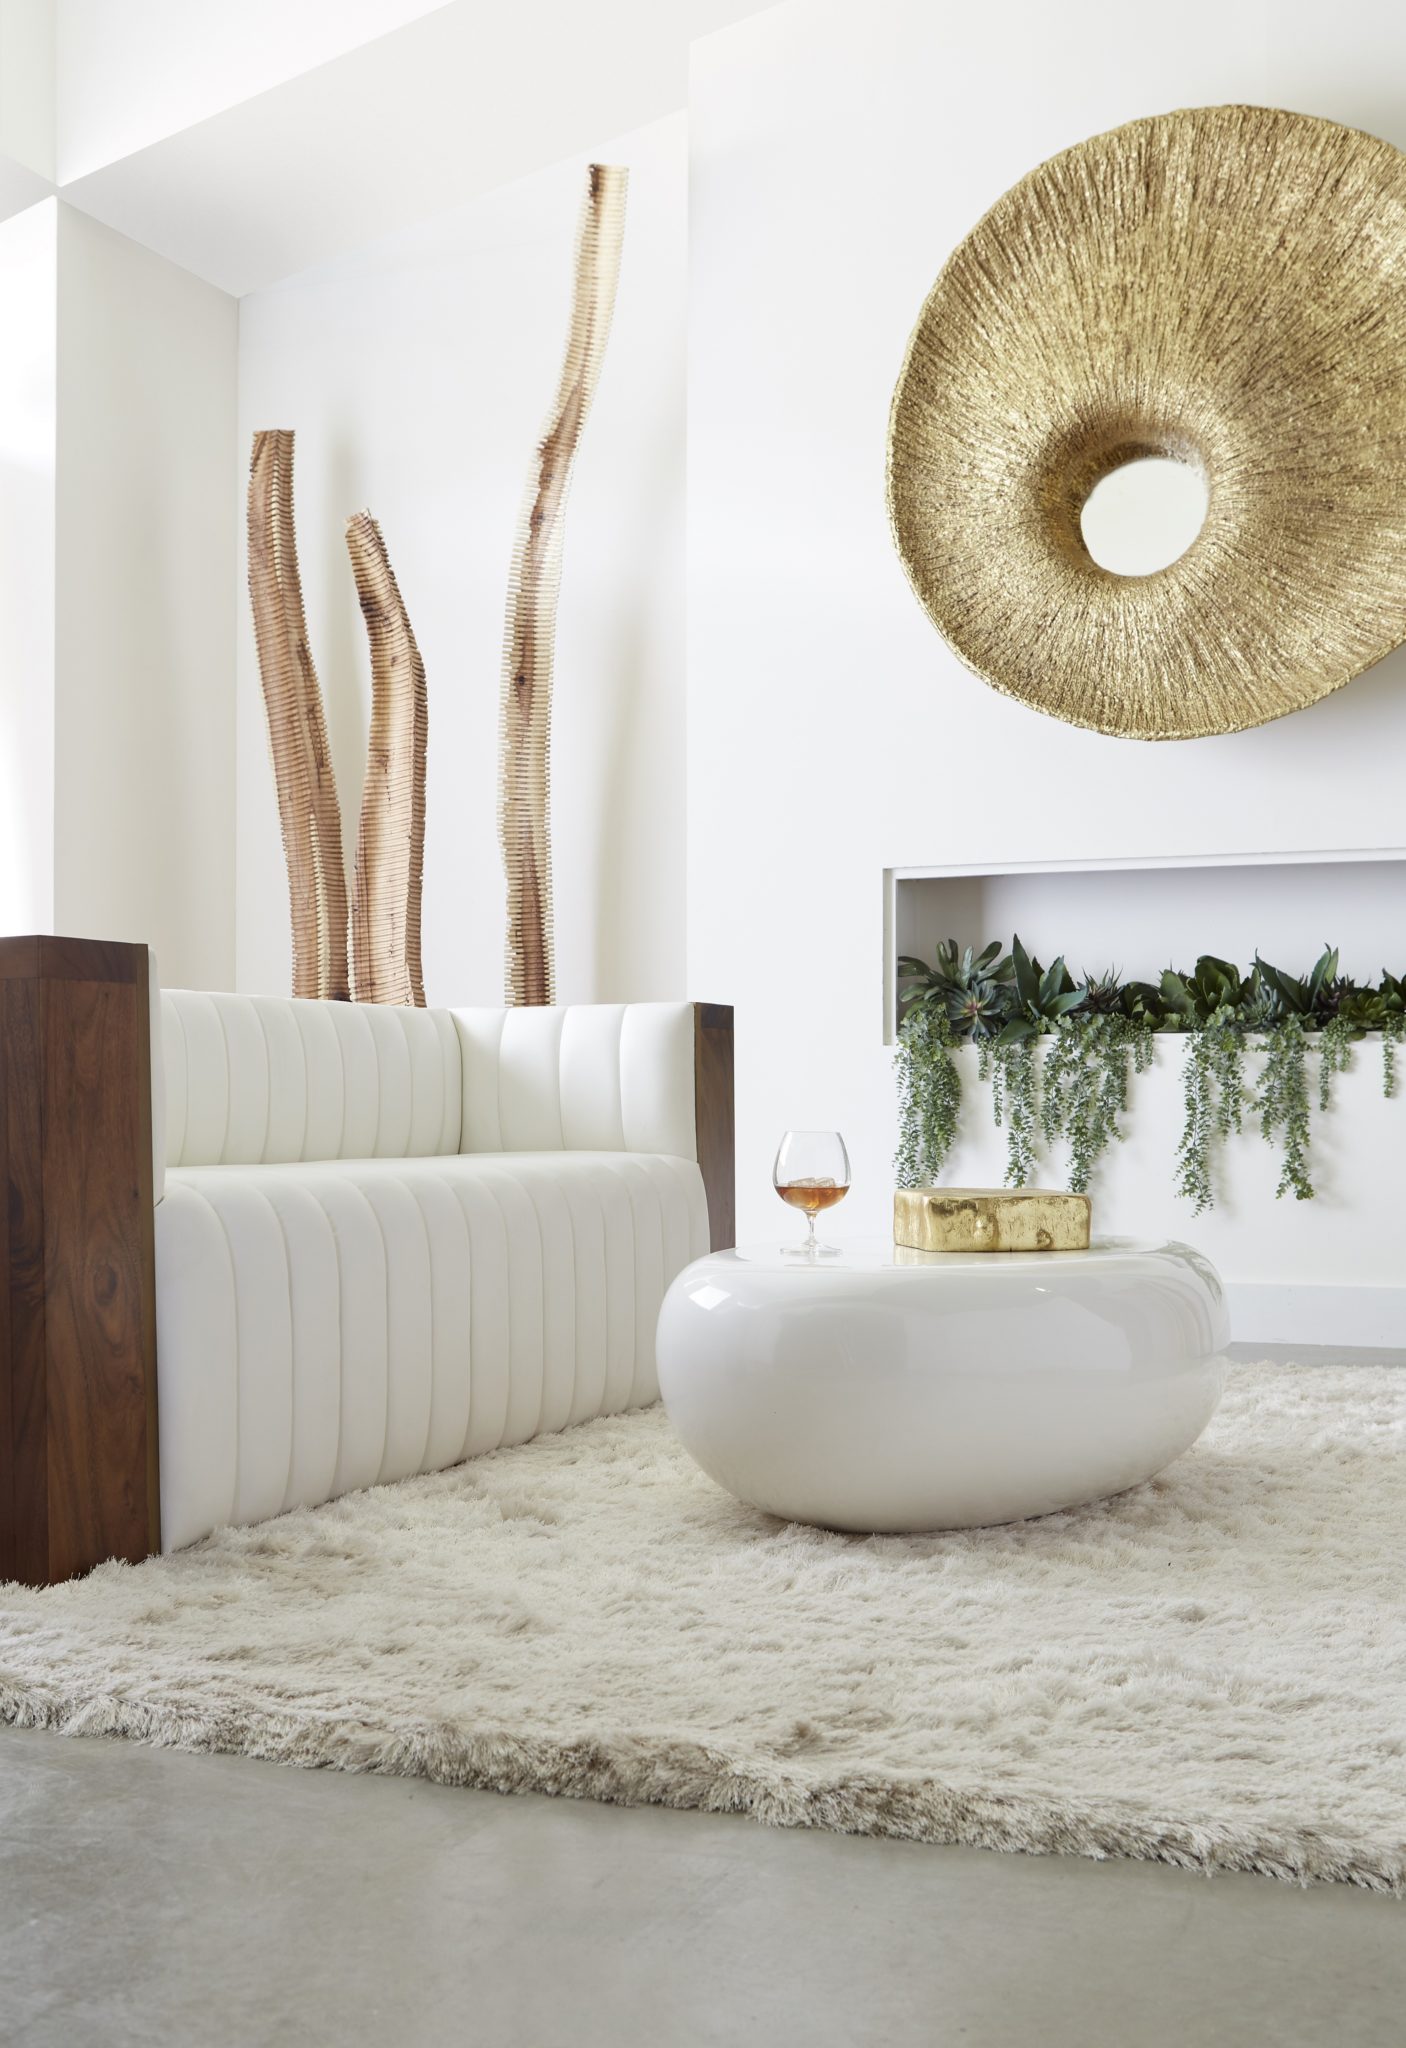 A room with a wood couch sitting on a fuzzy carpet. A coffee table with a wine glass sits in front of some plants and under a modern mirror.